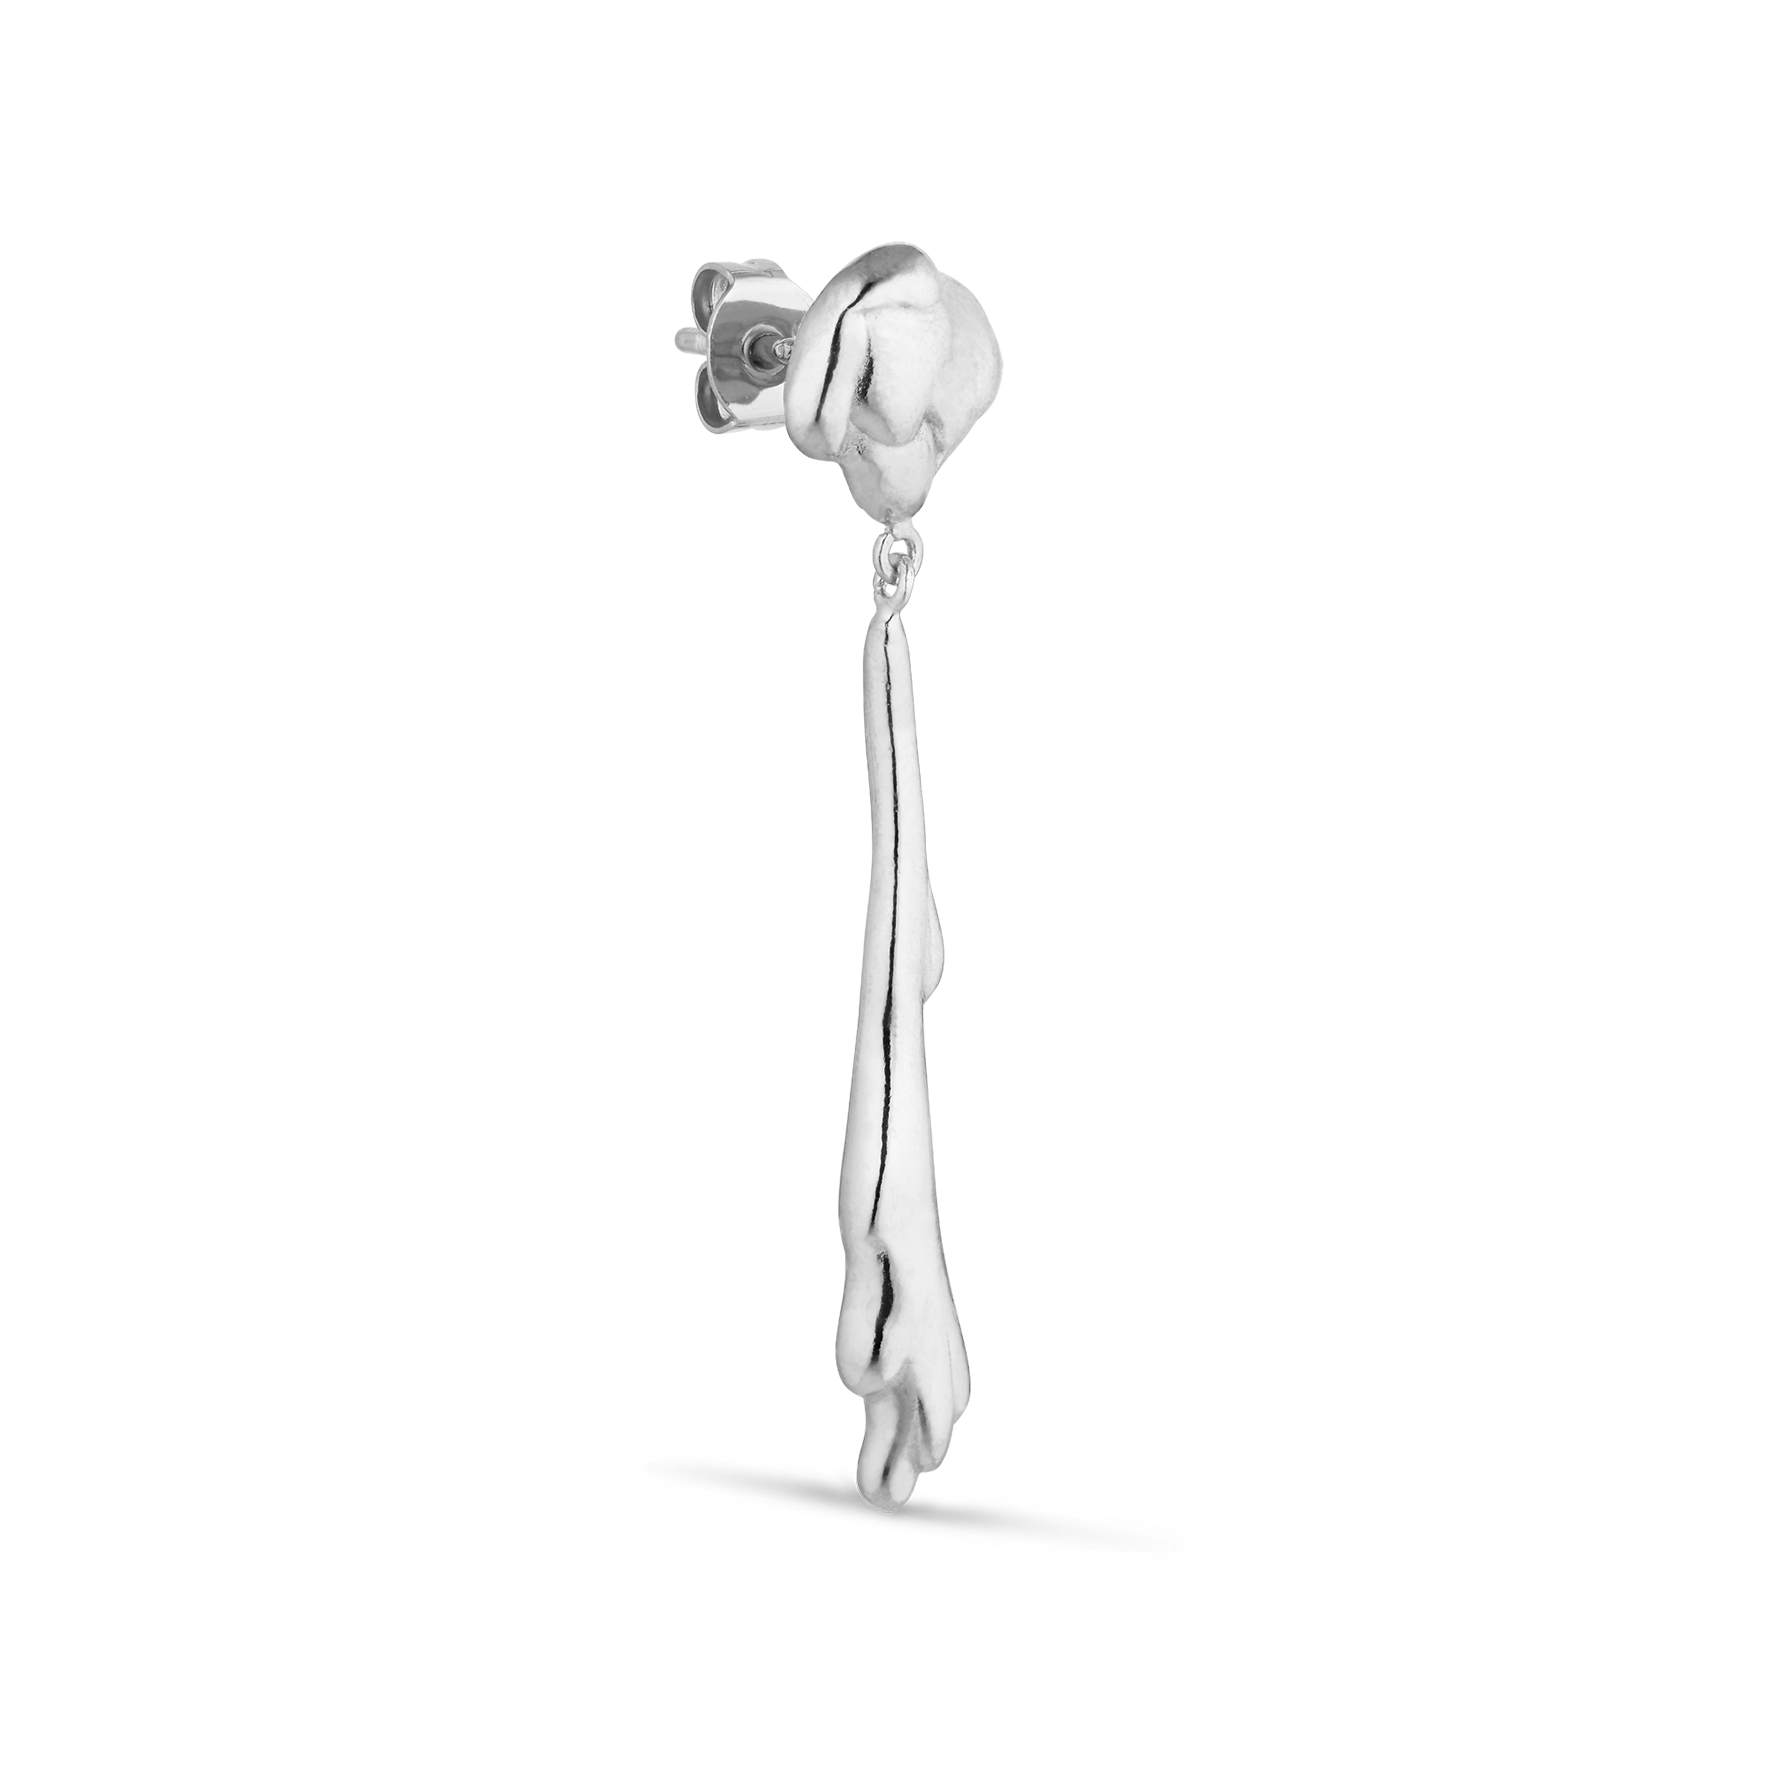 Drippy Earring With Drop Pendant von Jane Kønig in Silber Sterling 925